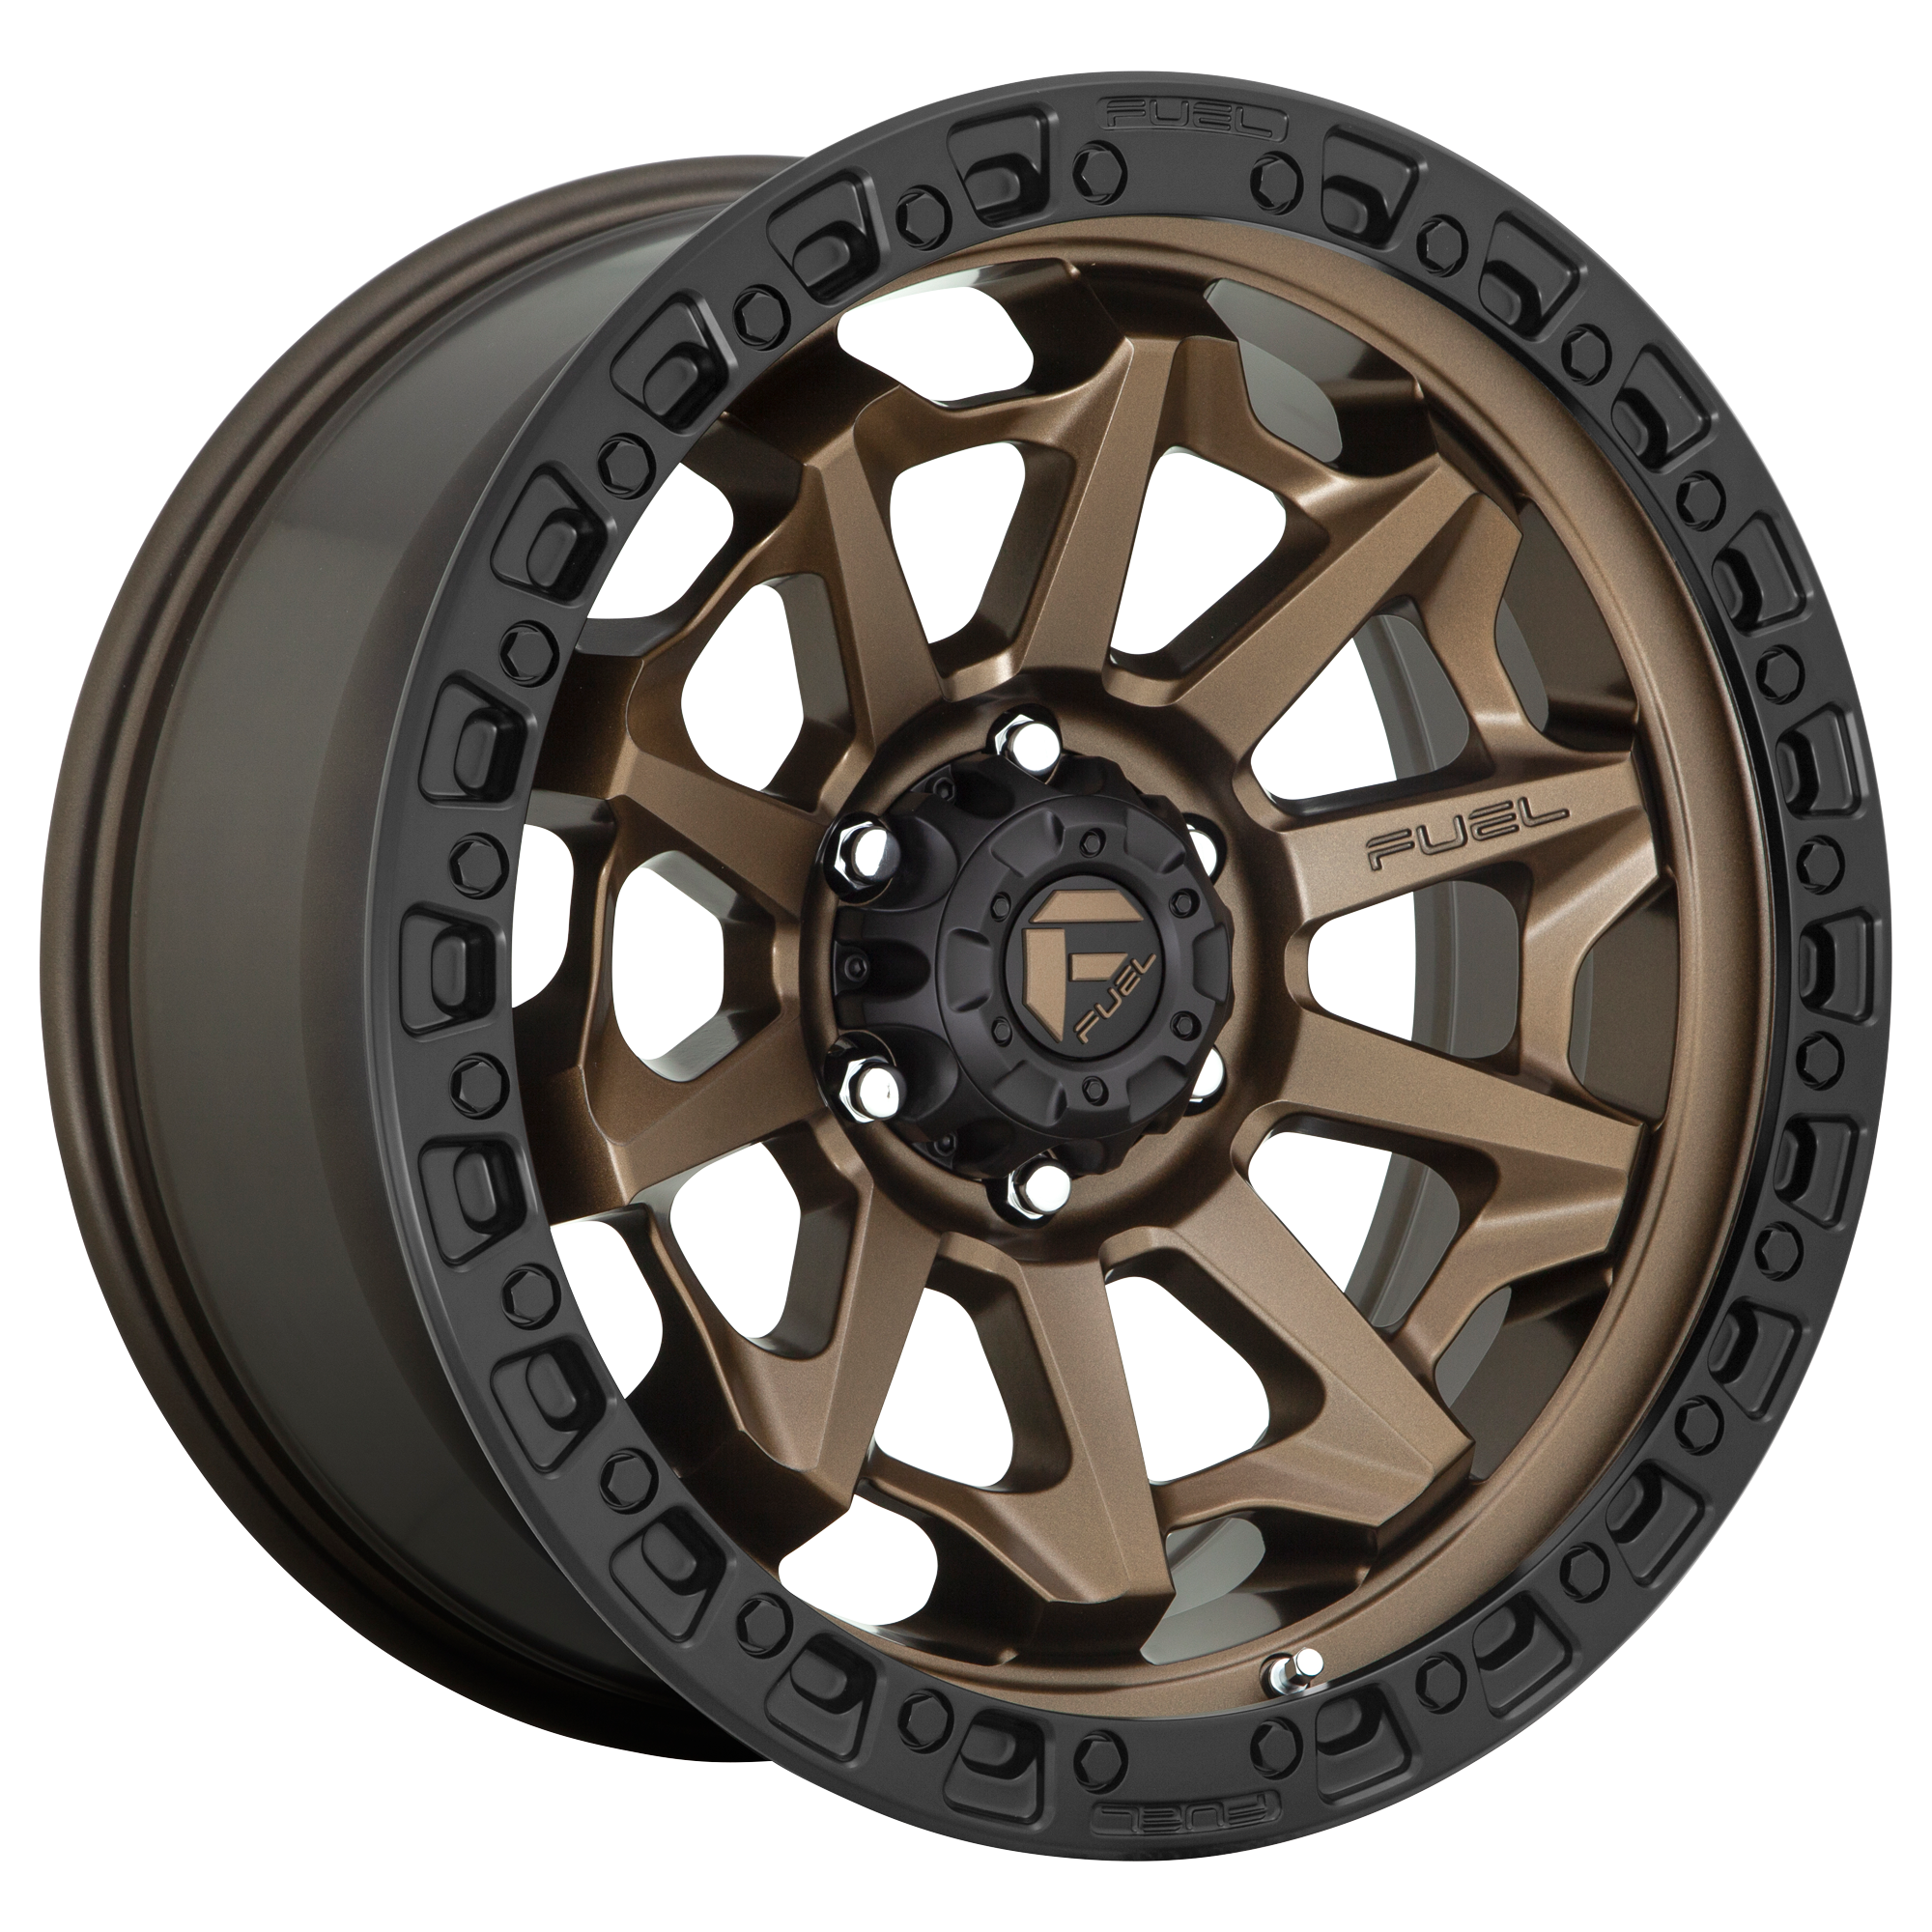 COVERT 18x9 6x135.00 MATTE BRONZE BLACK BEAD RING (20 mm) - Tires and Engine Performance